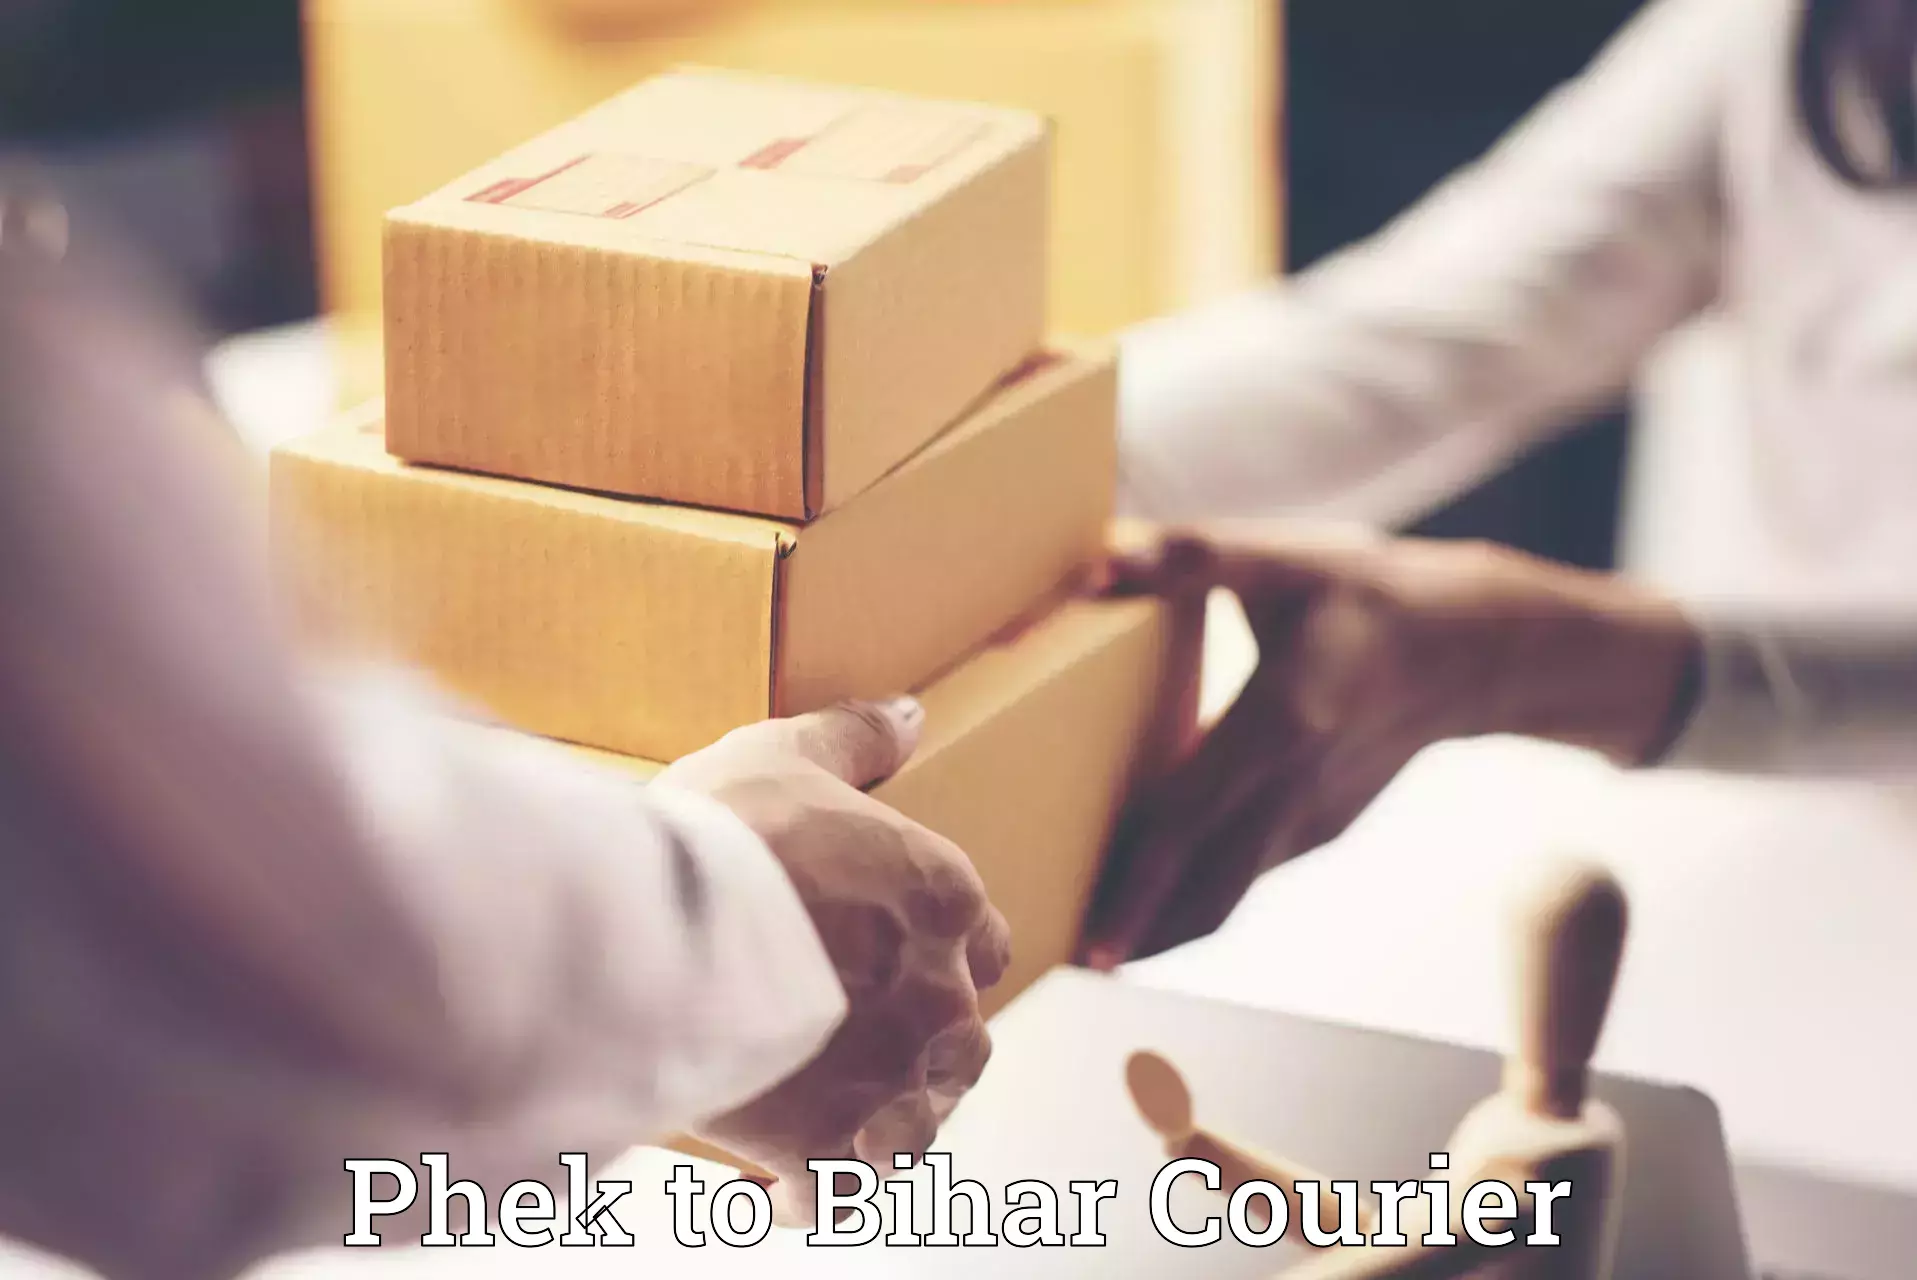 Home relocation experts Phek to Bihar